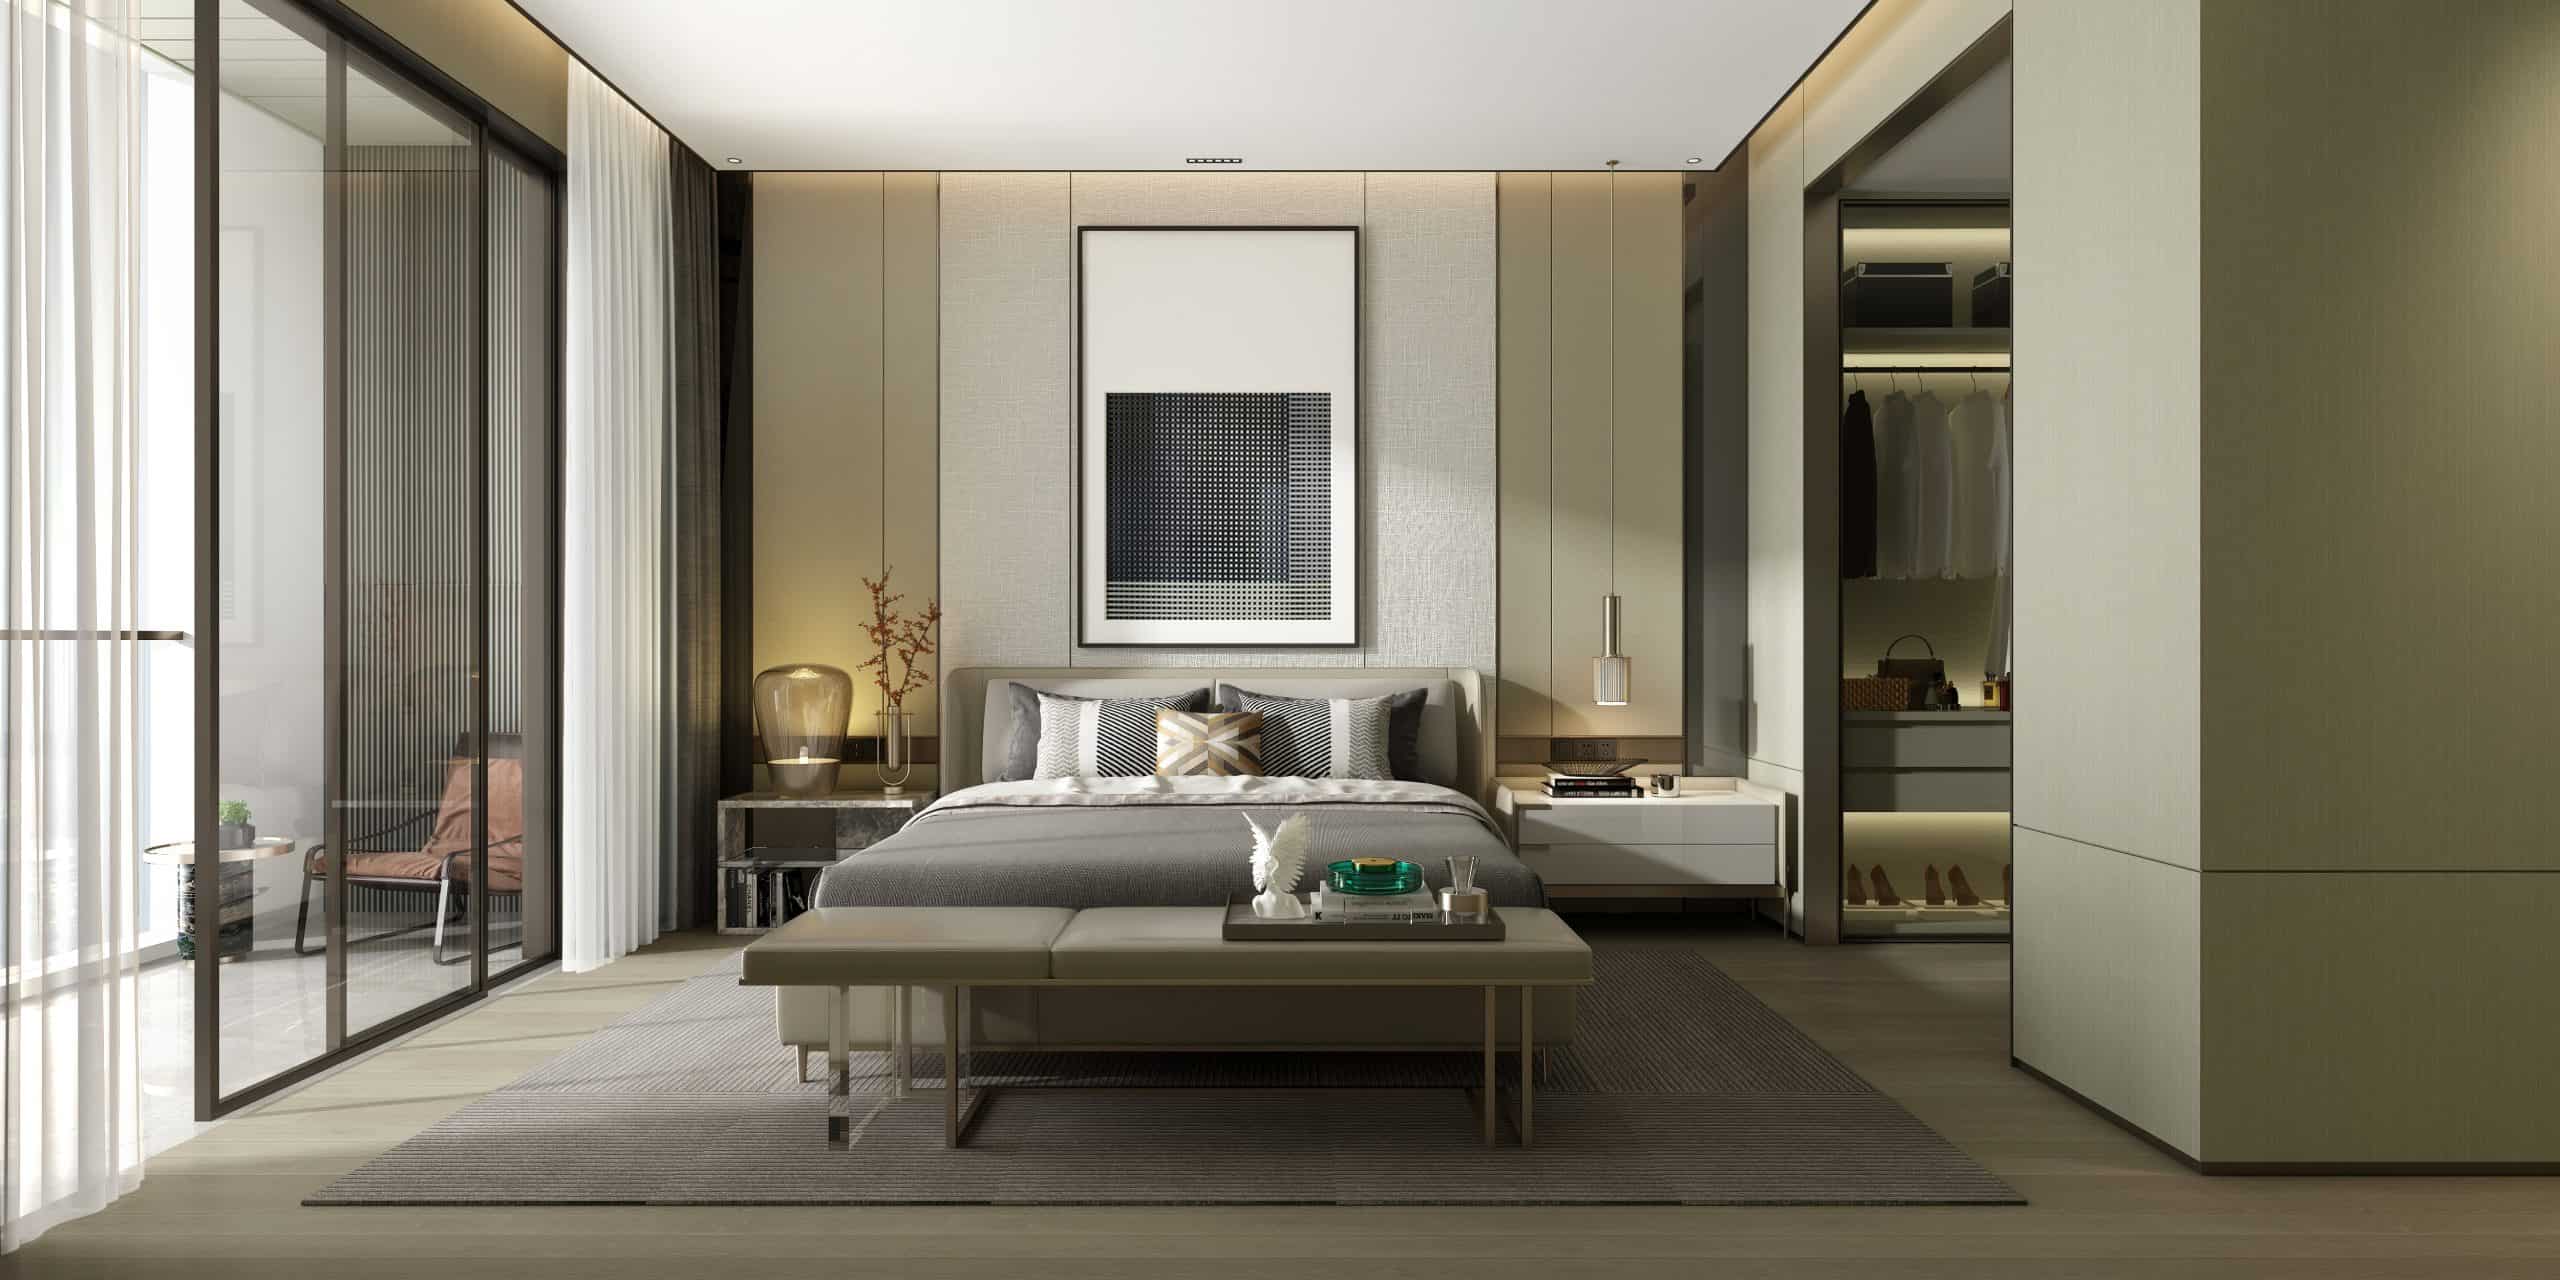 How to Look for the Perfect Bedroom Furniture for Your Home